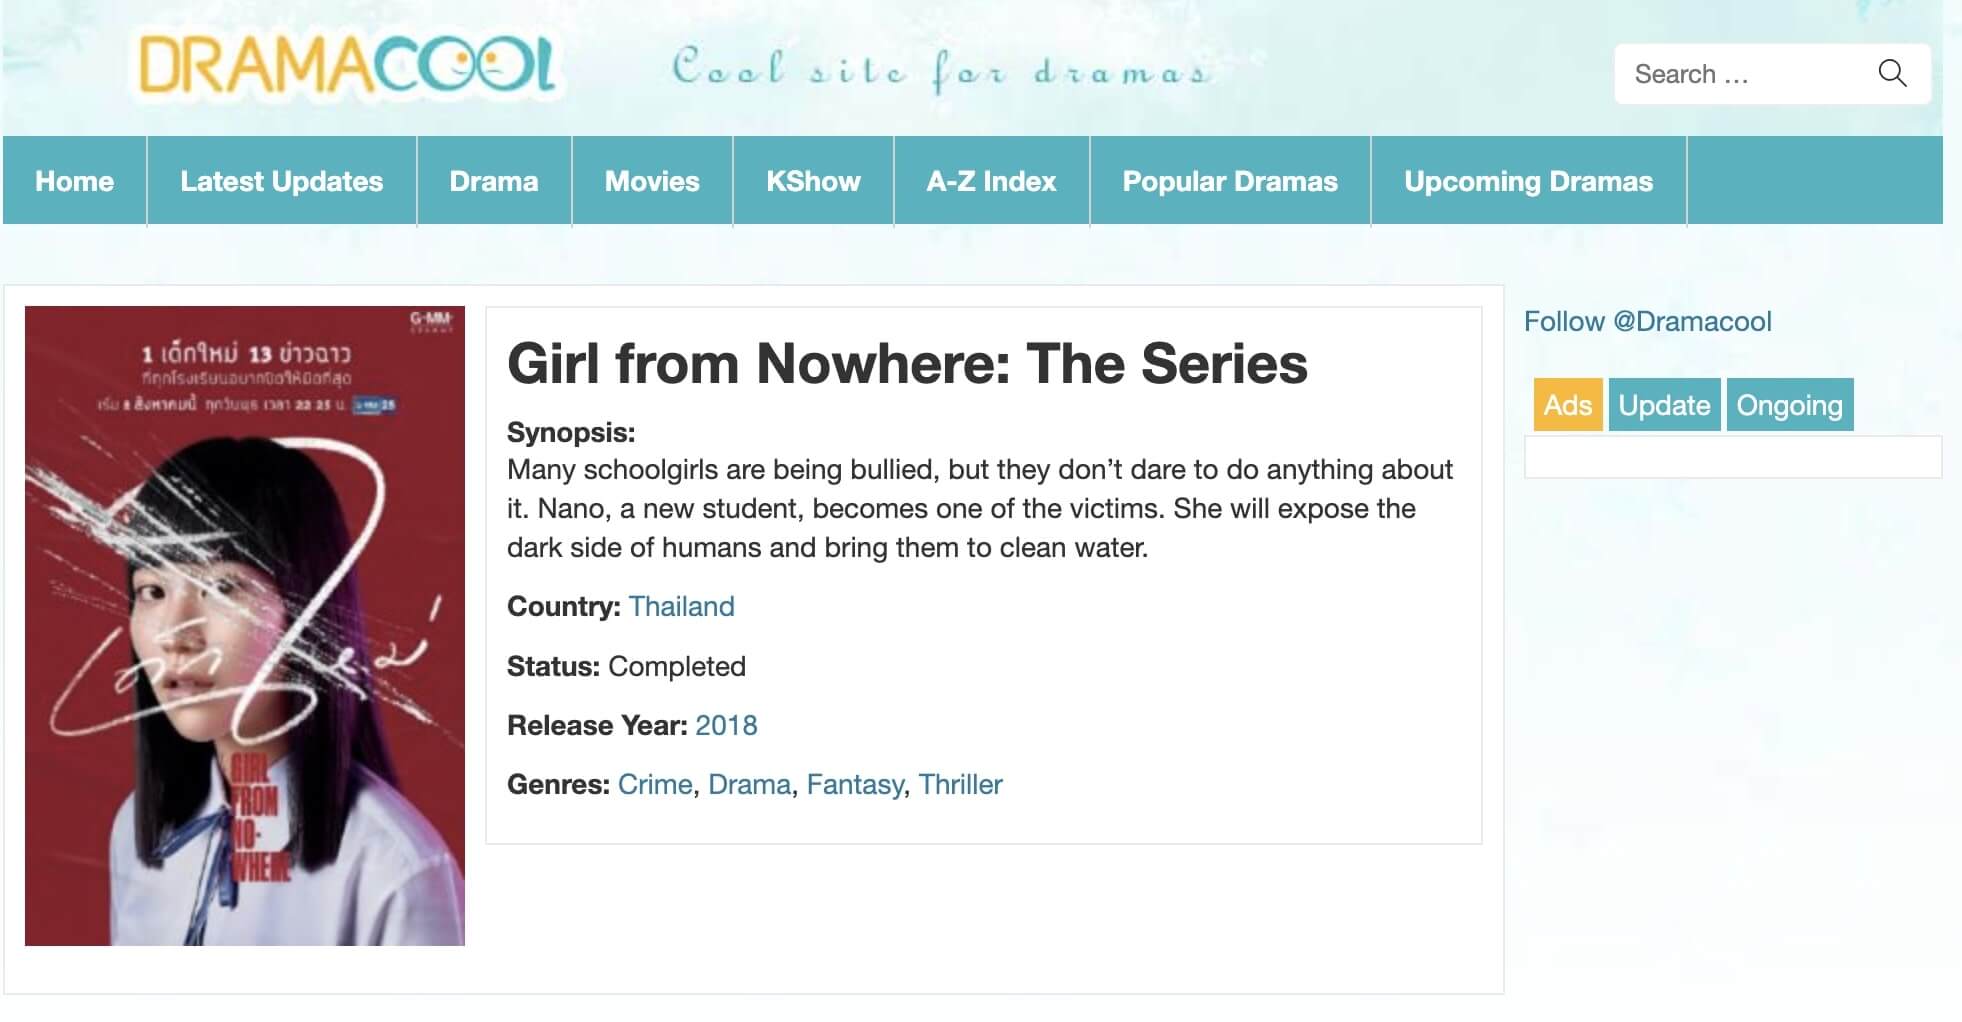  Girl-from-Nowhere-Dramacool  